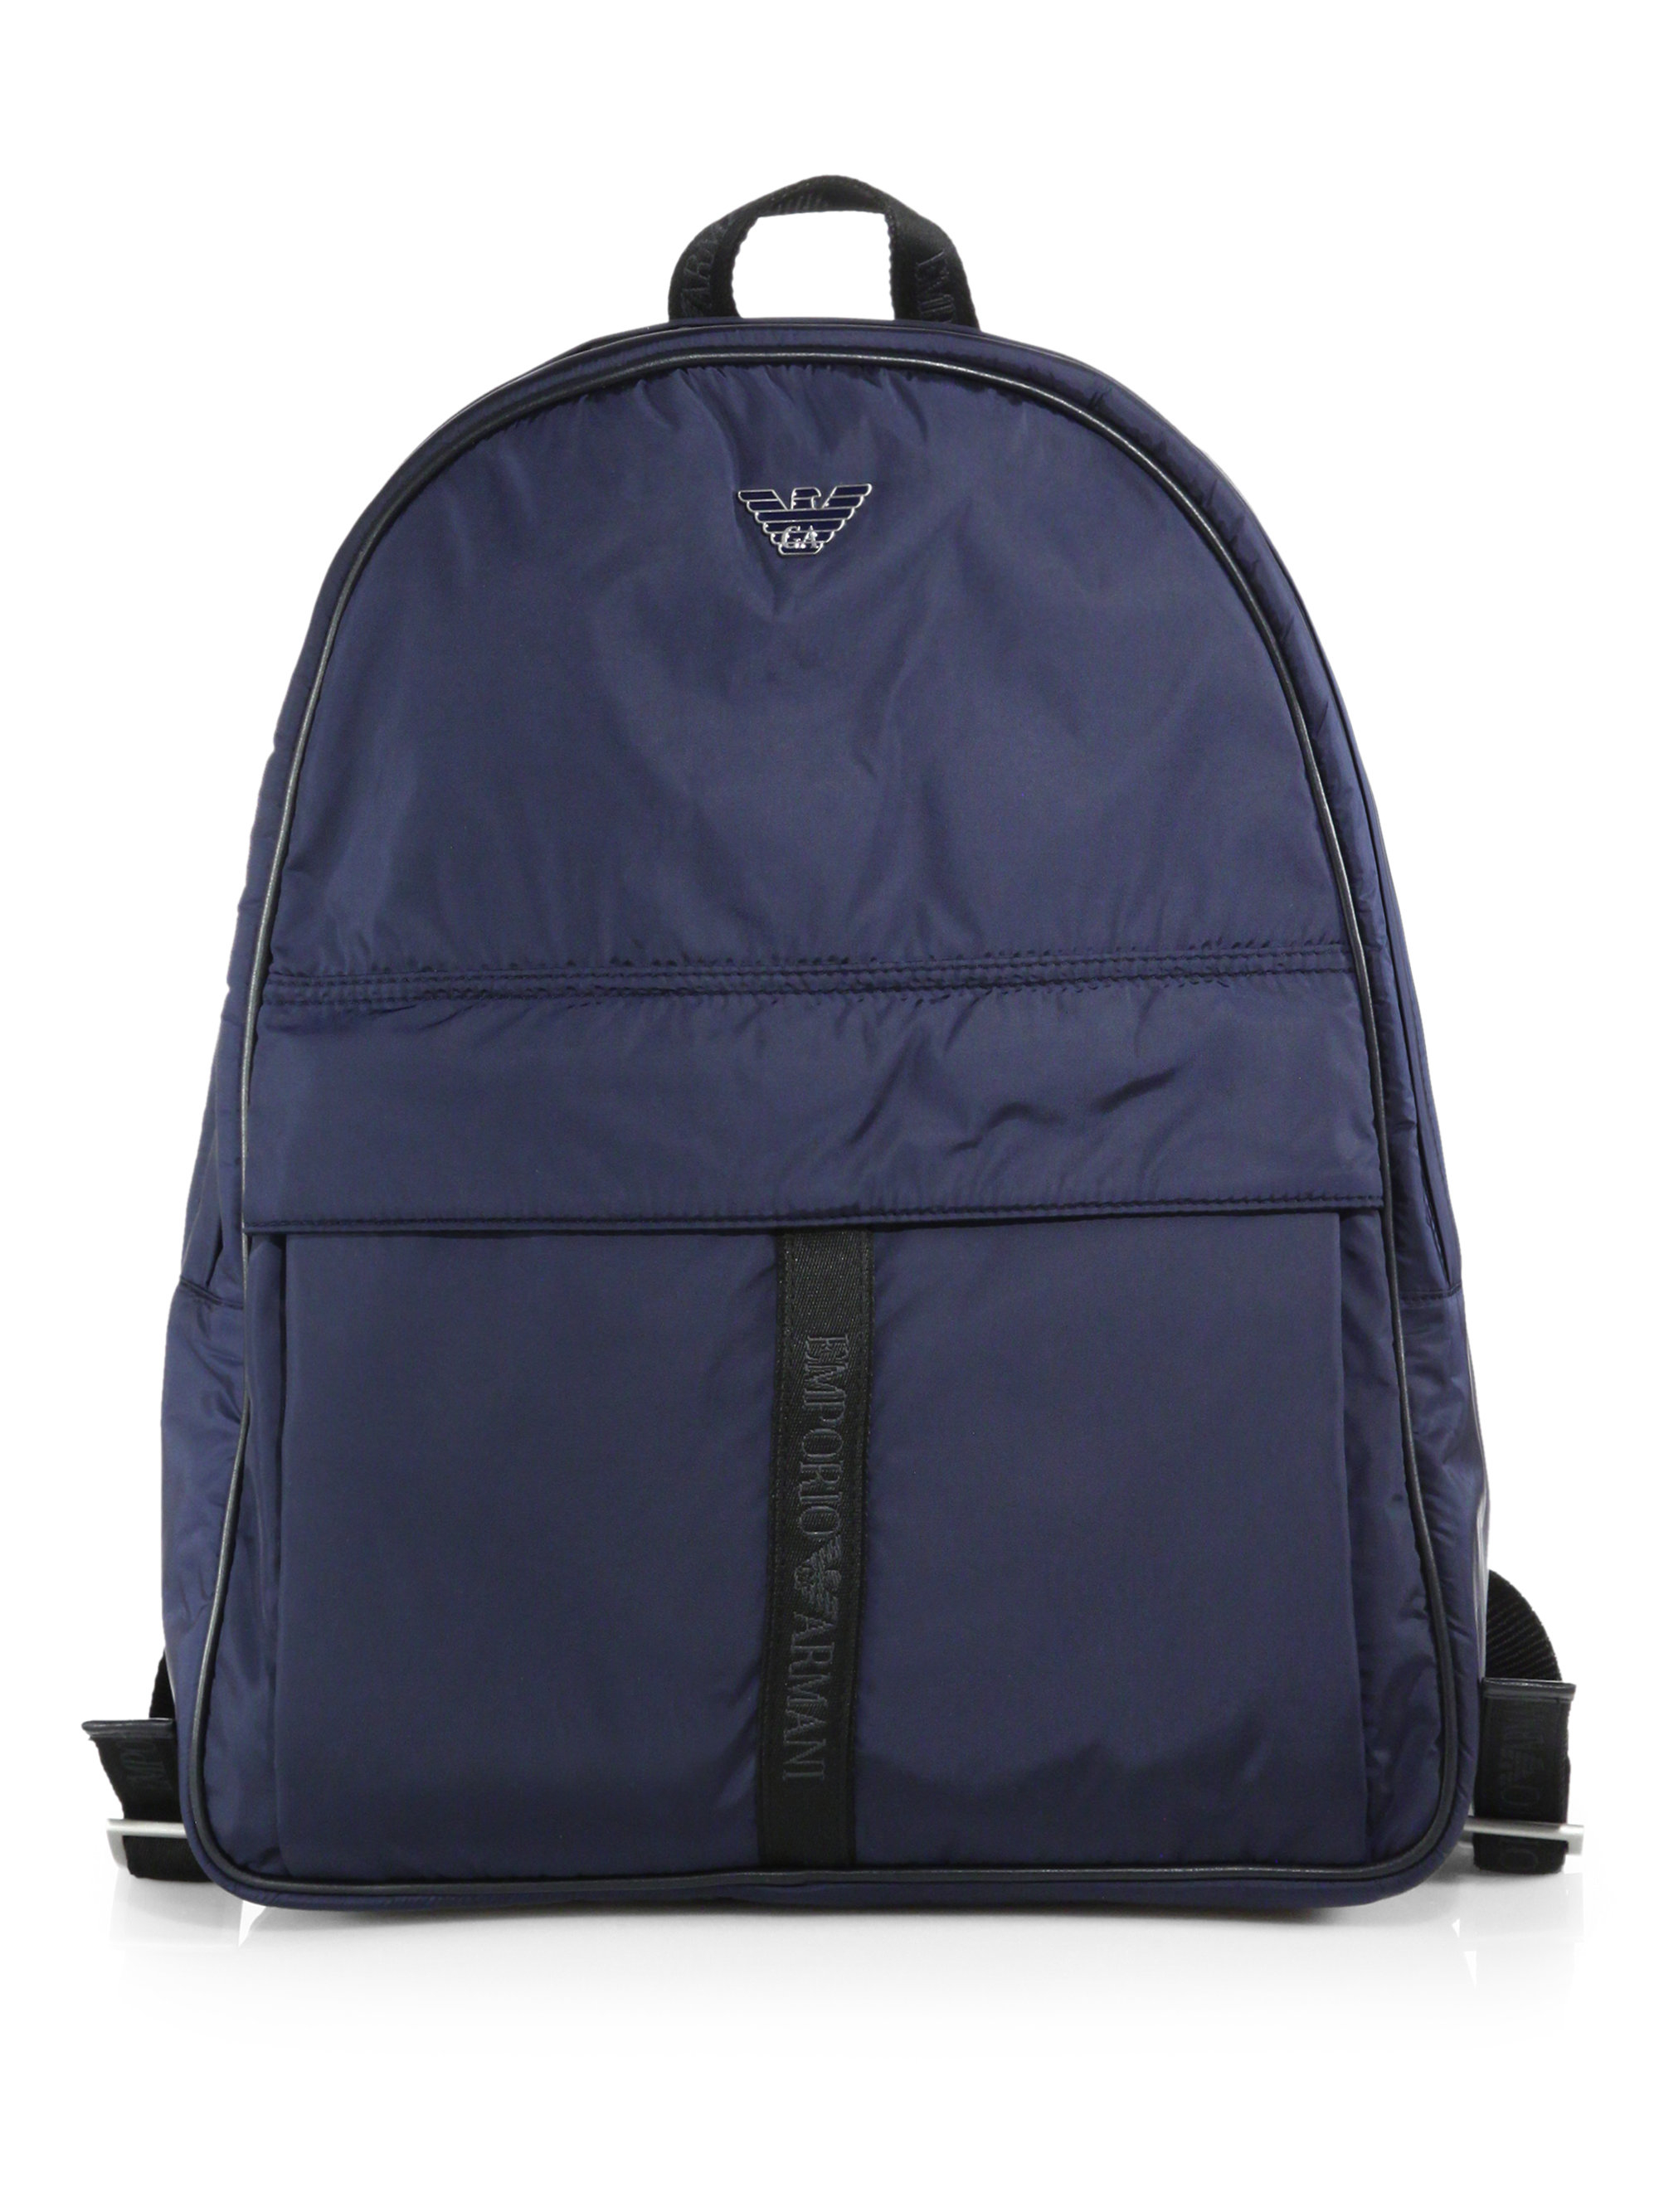 Lyst - Emporio Armani Nylon Backpack in Blue for Men